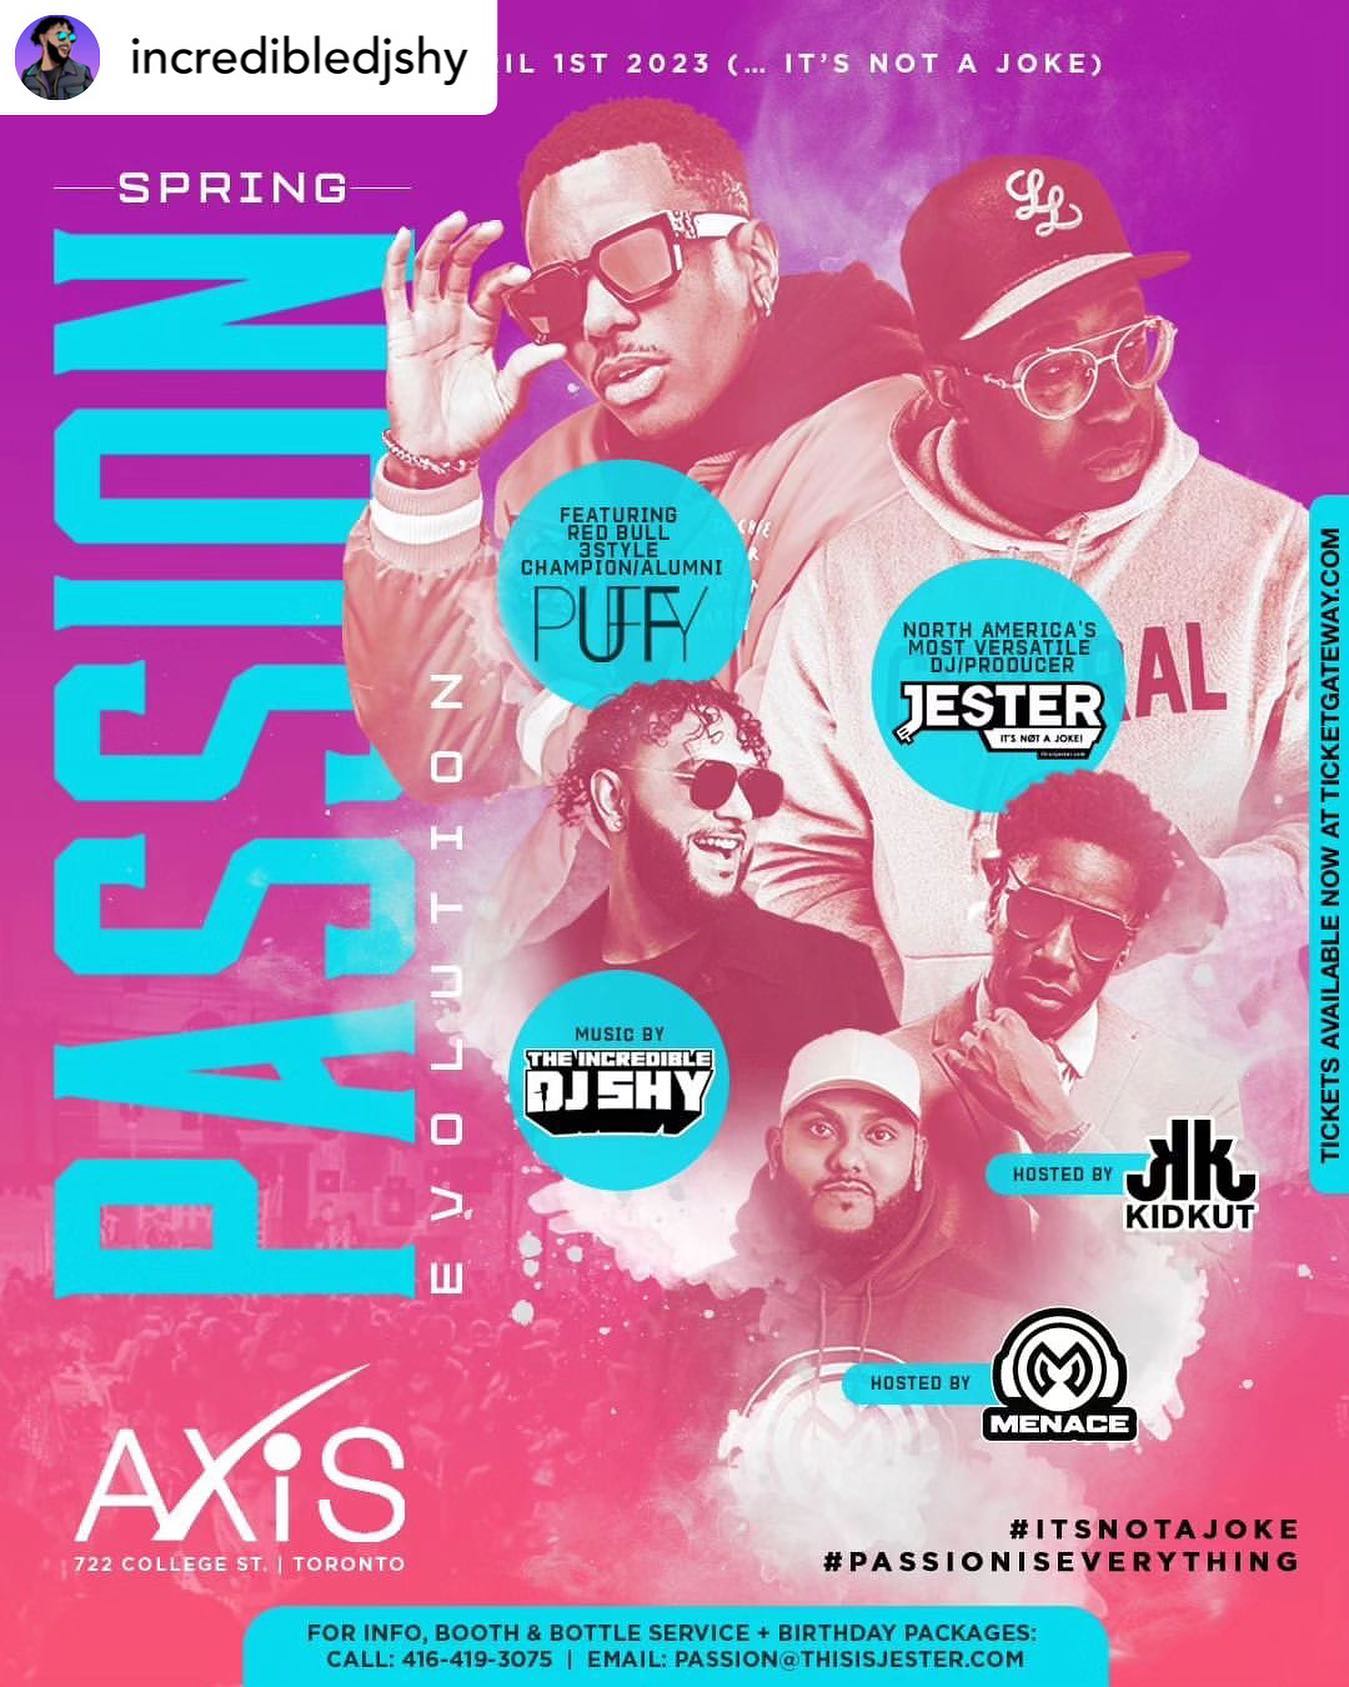 Spring PASSION (Evolution) . 
ONE WEEK AWAY!  

Saturday April 1st 2023 (… It’s Not A Joke) 

Spring PASSION (Evolution)

Inside The Axis Club - 722 College St.  

Featuring:

Red Bull 3Style Champion/Alumni/Skam Artist … DJ Puffy @deejaypuffy

North America’s Most Versatile DJ/Producer… Jester @thisisjester

The Incredible DJ Shy @incredibledjshy

Hosted by @kidkut & @itsmenacethedj

Tickets available at ticketgateway.com 

For info, booth & bottle service:
Call: 416-419-3075 Email: passion@thisisjester.com